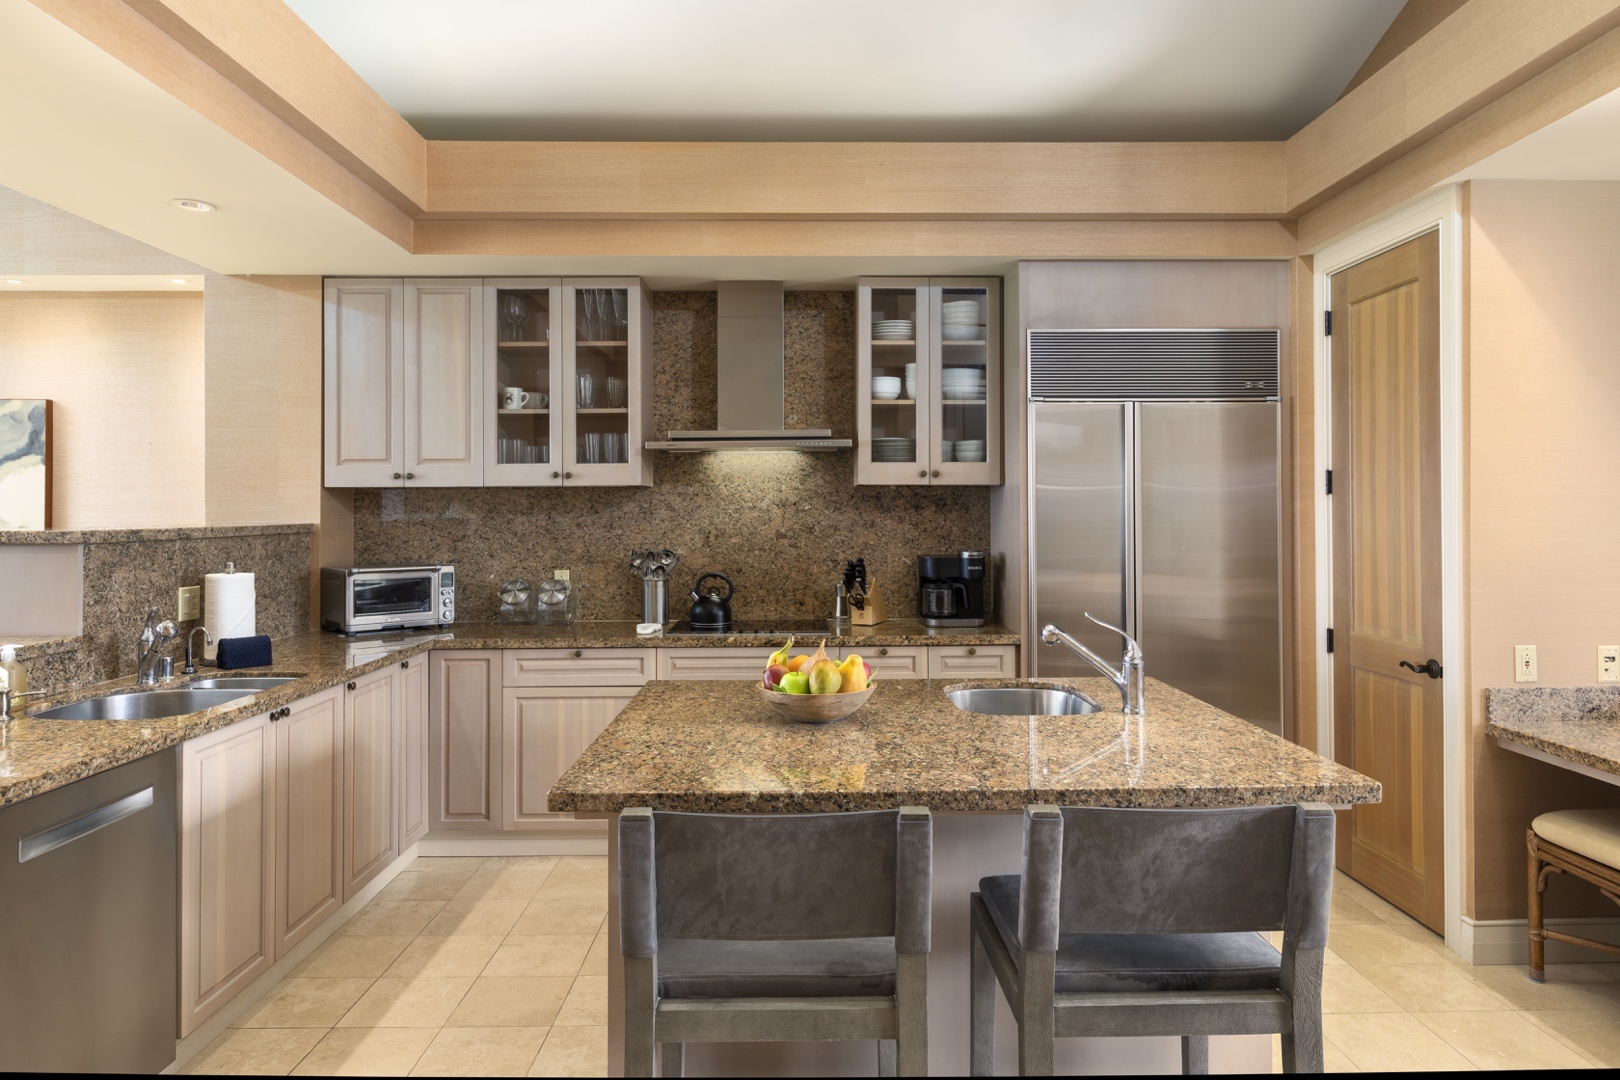 Kailua Kona Vacation Rentals, 3BD Palm Villa (130B) at Four Seasons Resort at Hualalai - Ample counter space, top tier appliances and gleaming granite - a chef’s delight!